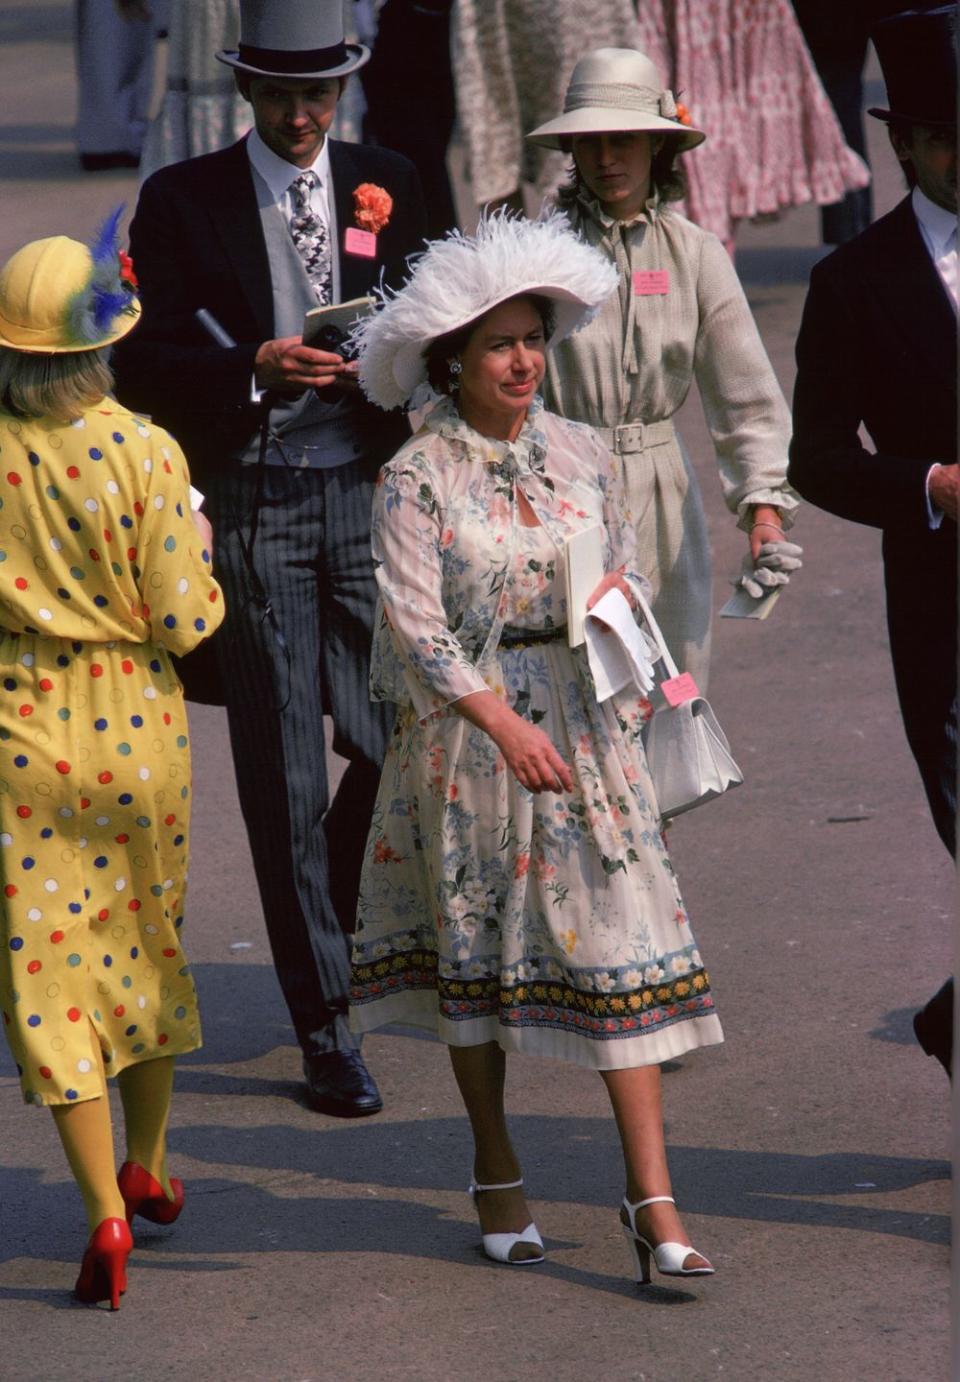 <p>Princess Margaret attends the 1979 Royal Ascot Races in a patterned dress and feathered white hat.</p>